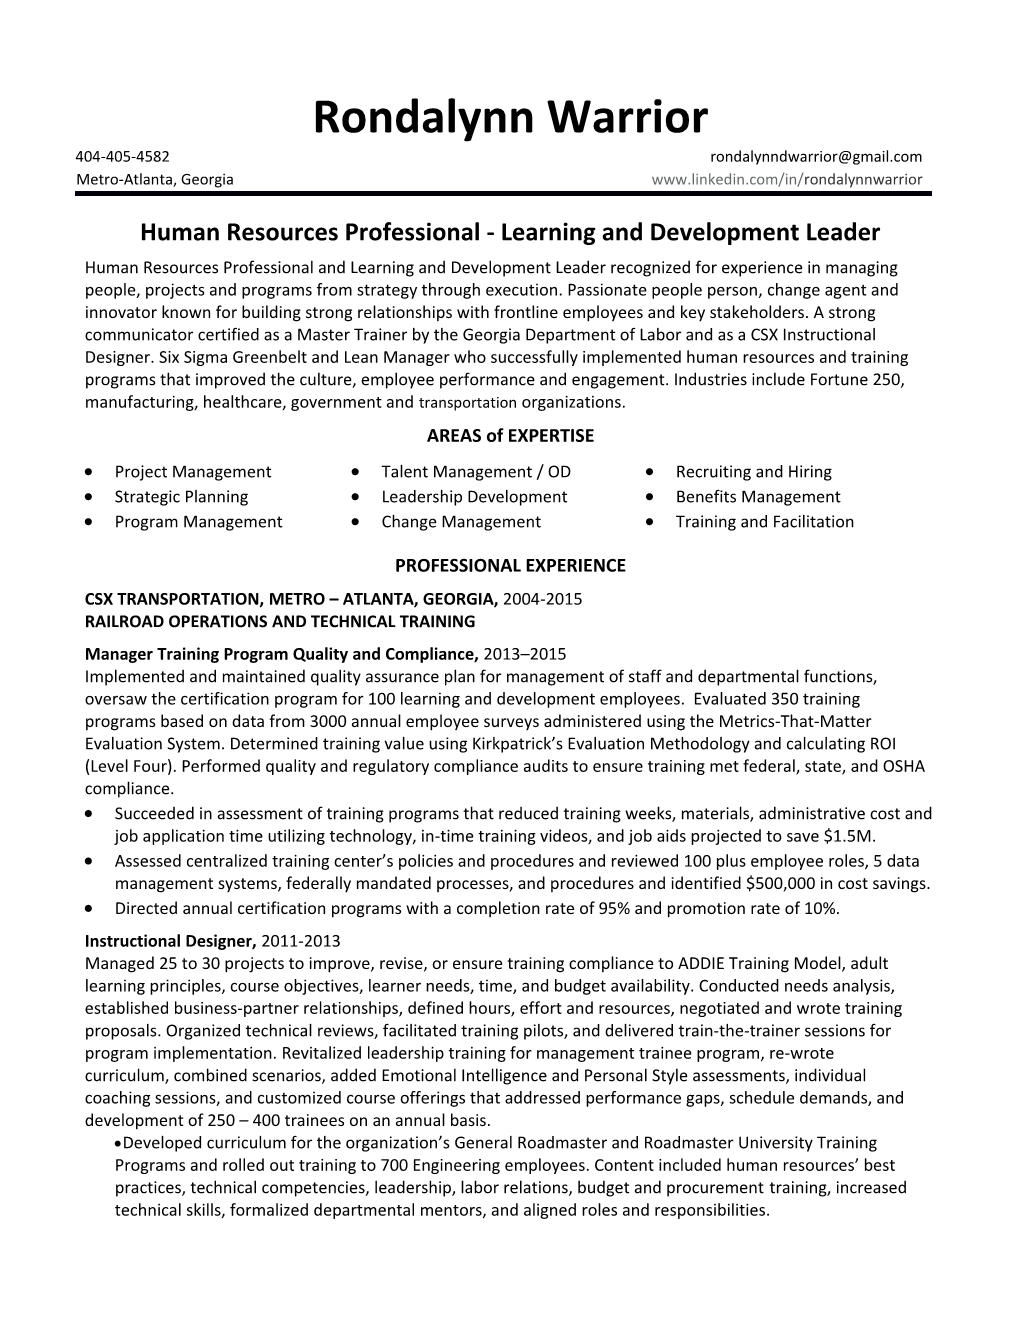 Human Resources Professional - Learning and Development Leader